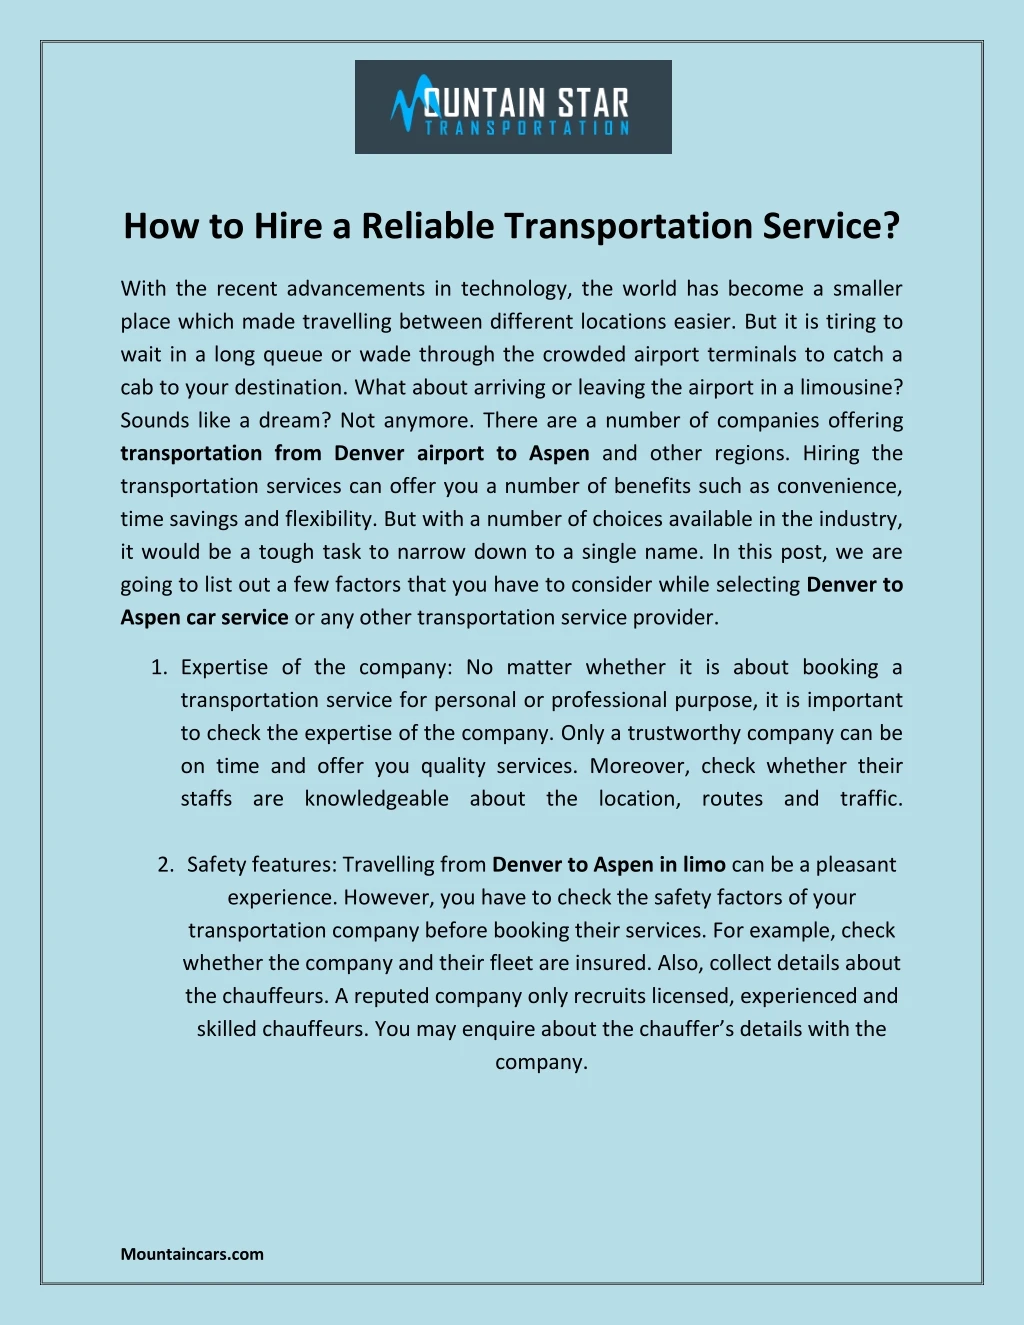 how to hire a reliable transportation service